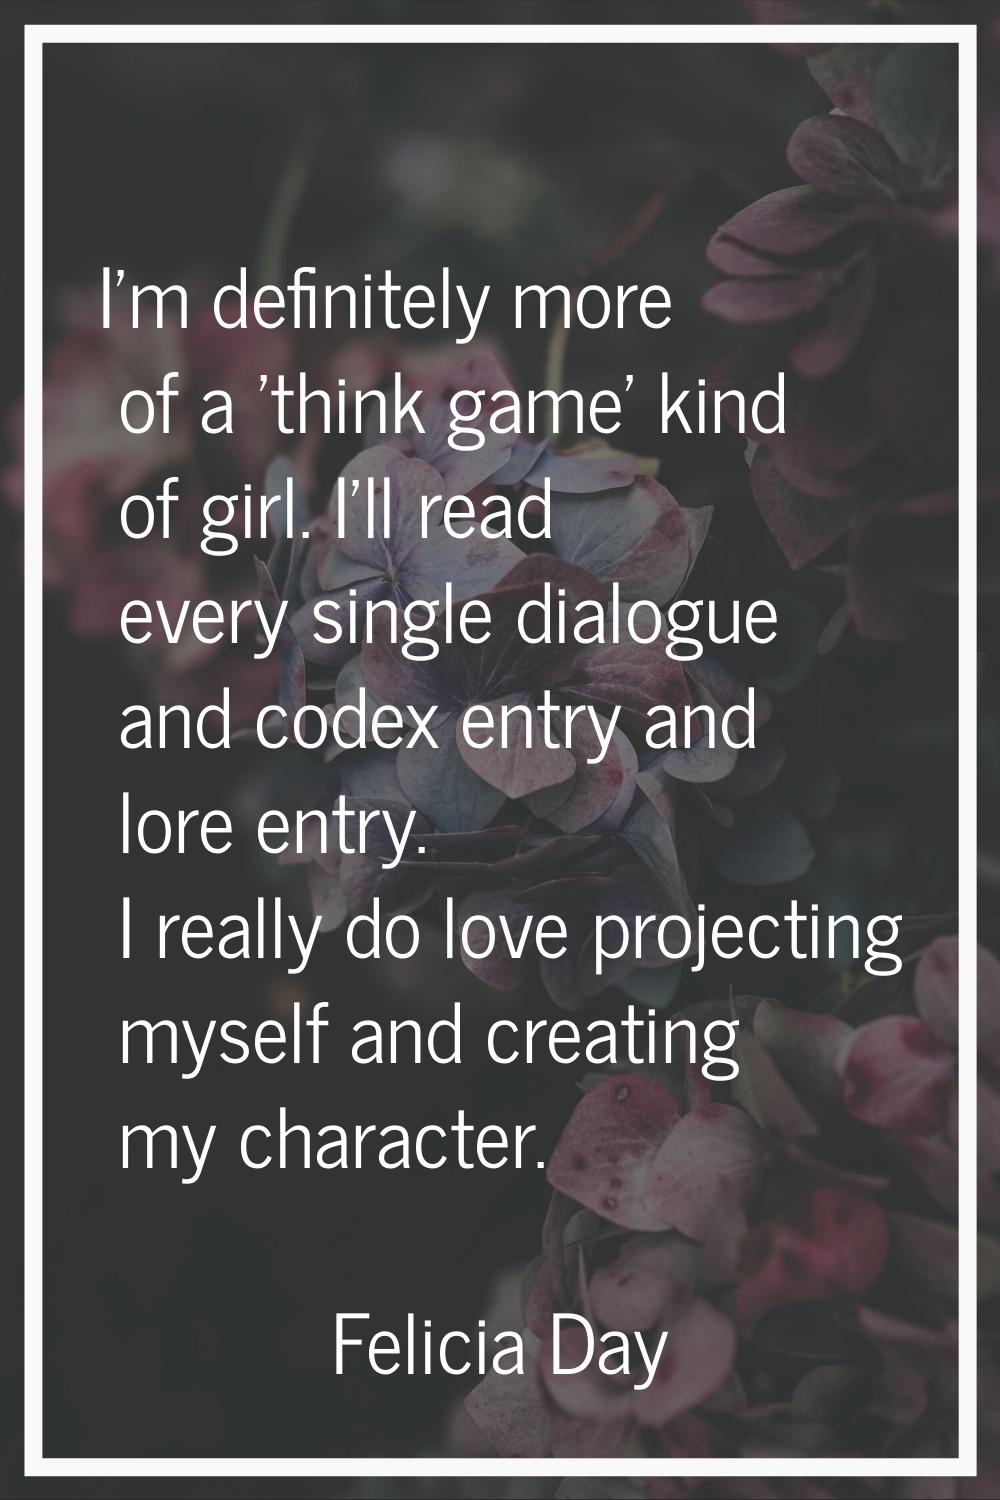 I'm definitely more of a 'think game' kind of girl. I'll read every single dialogue and codex entry